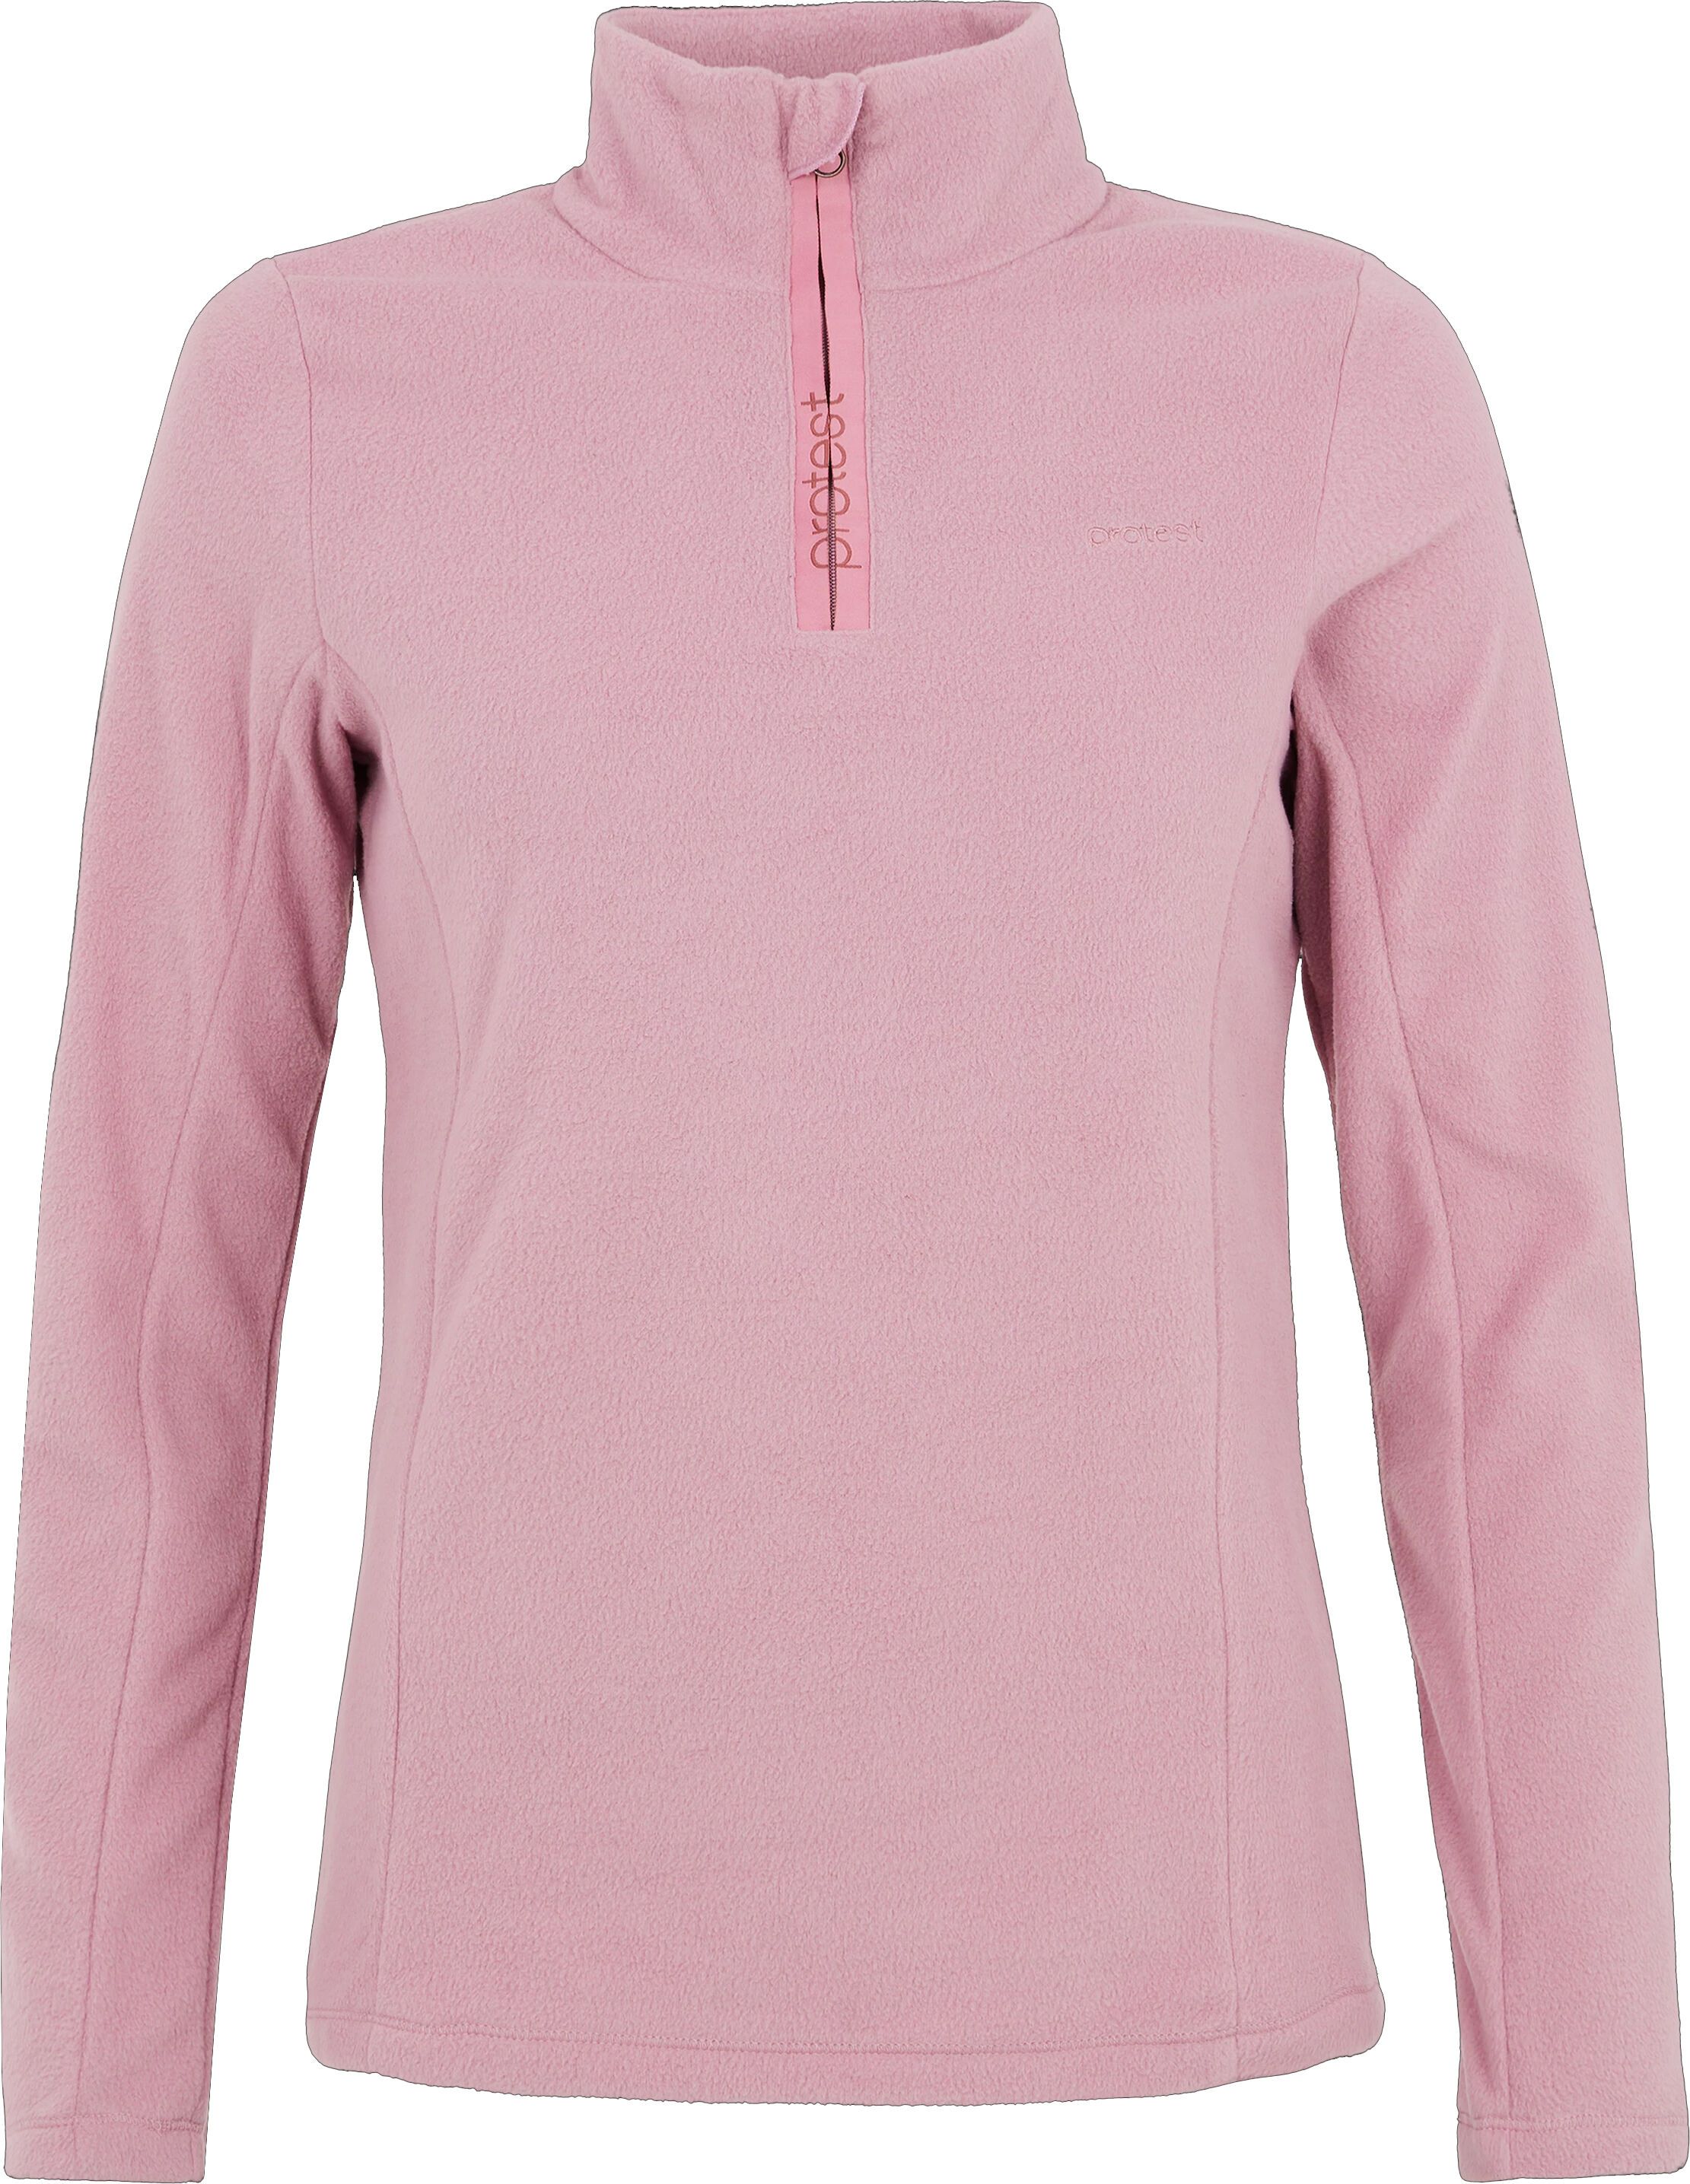 PROTEST MUTEZ 1/4 CAMEO PINK M